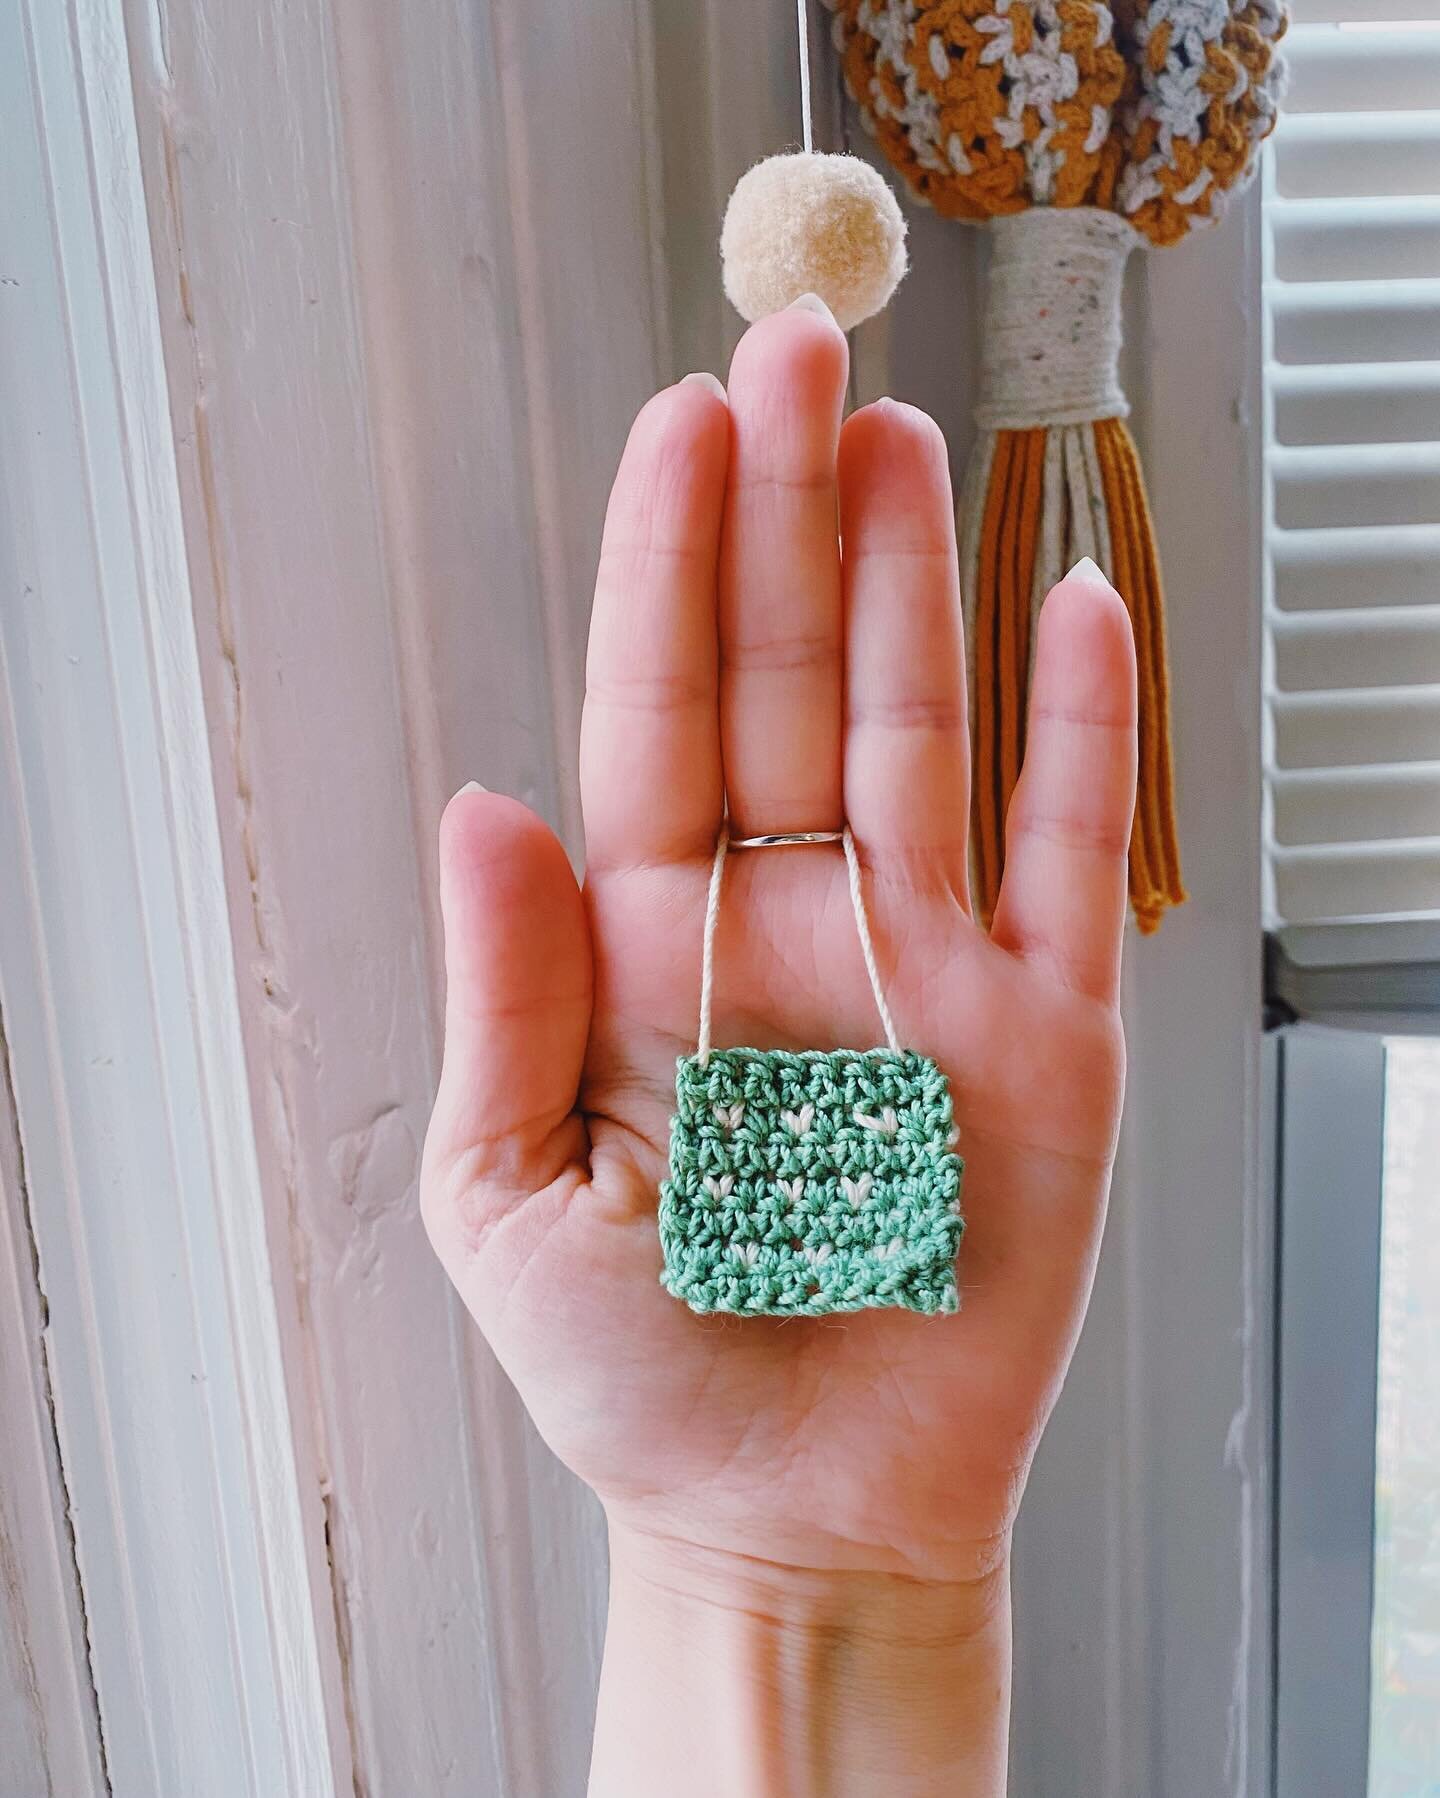 I made Spencer a teeny tiny valentines tapestry in the colors of his first two shells 🐚💚🤍✨
.
.
.
#tapestry #microcrochet #crochet #crocheting #crochetlove #crochetaddict #crochetersofinstagram #crochetinspiration #tiny #tinydecor #mini #minature #